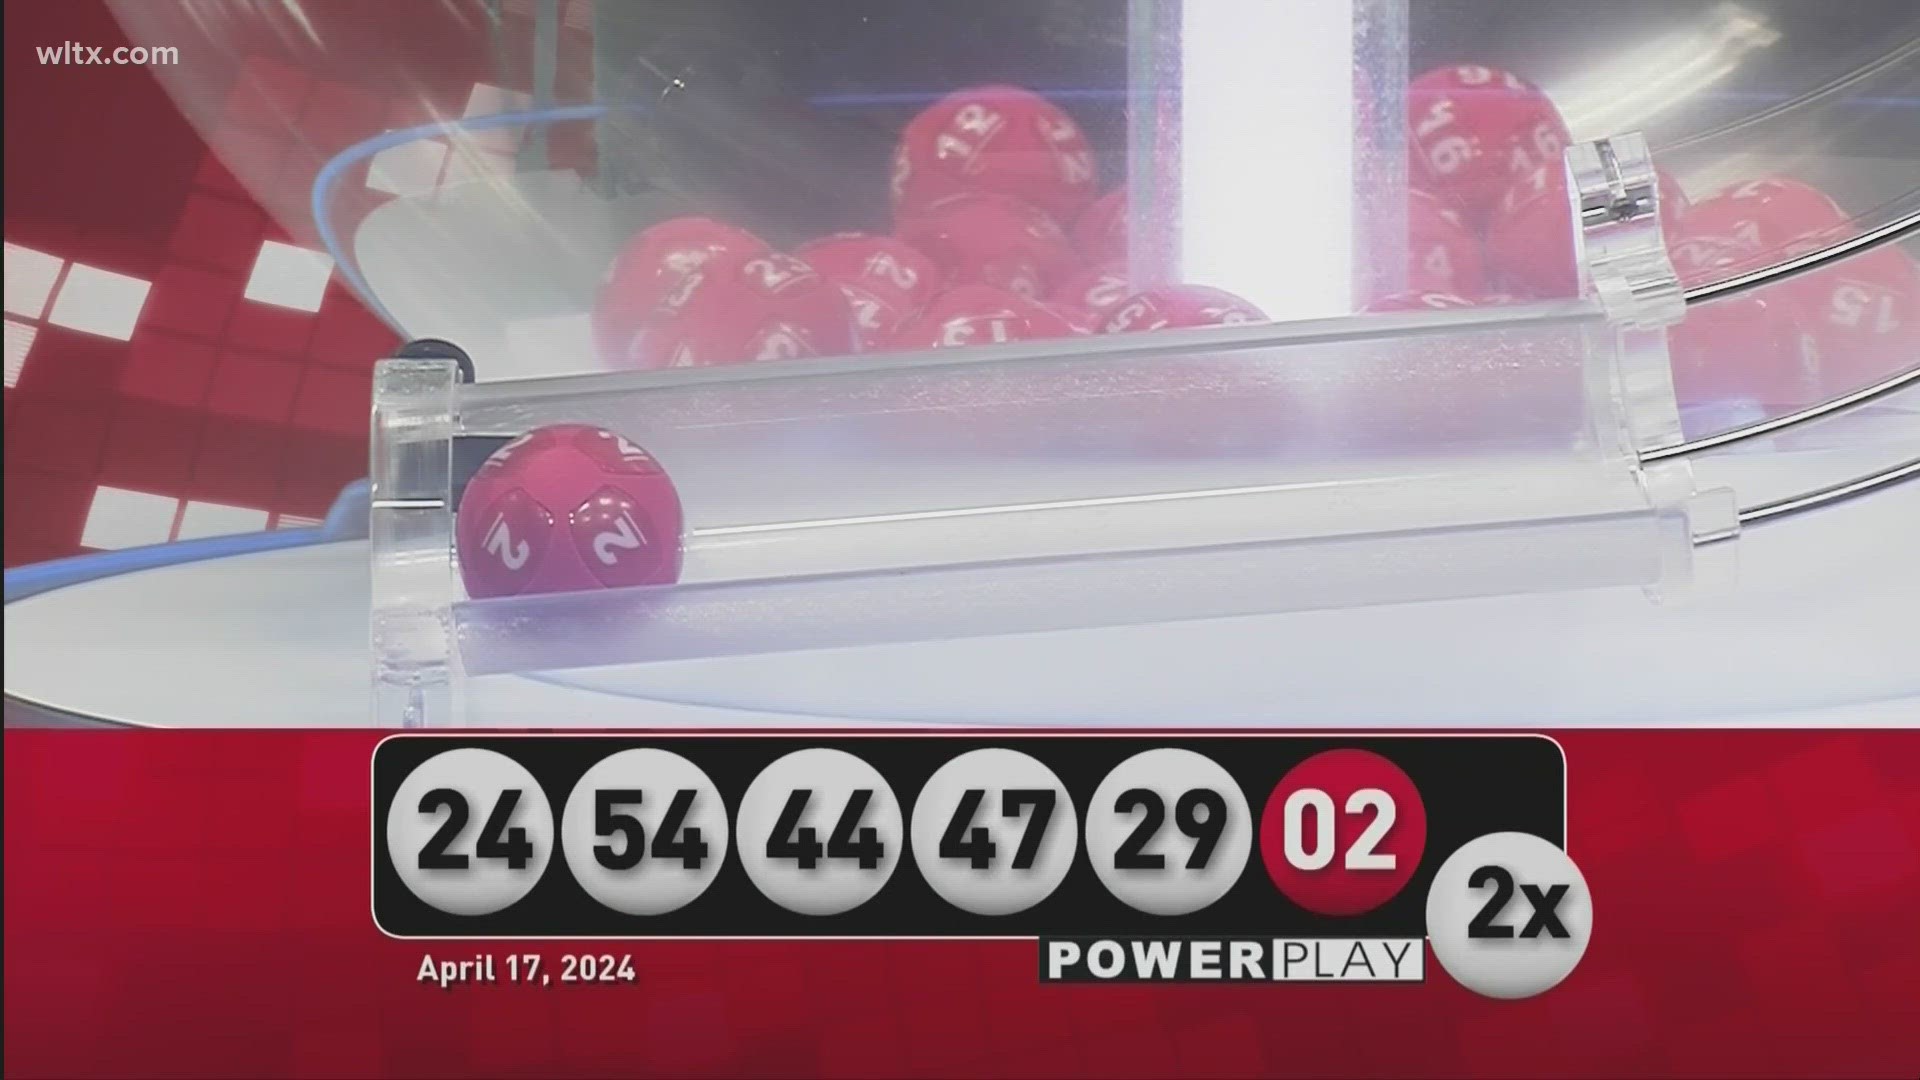 Here are the winning Powerball numbers for April 17, 2024.